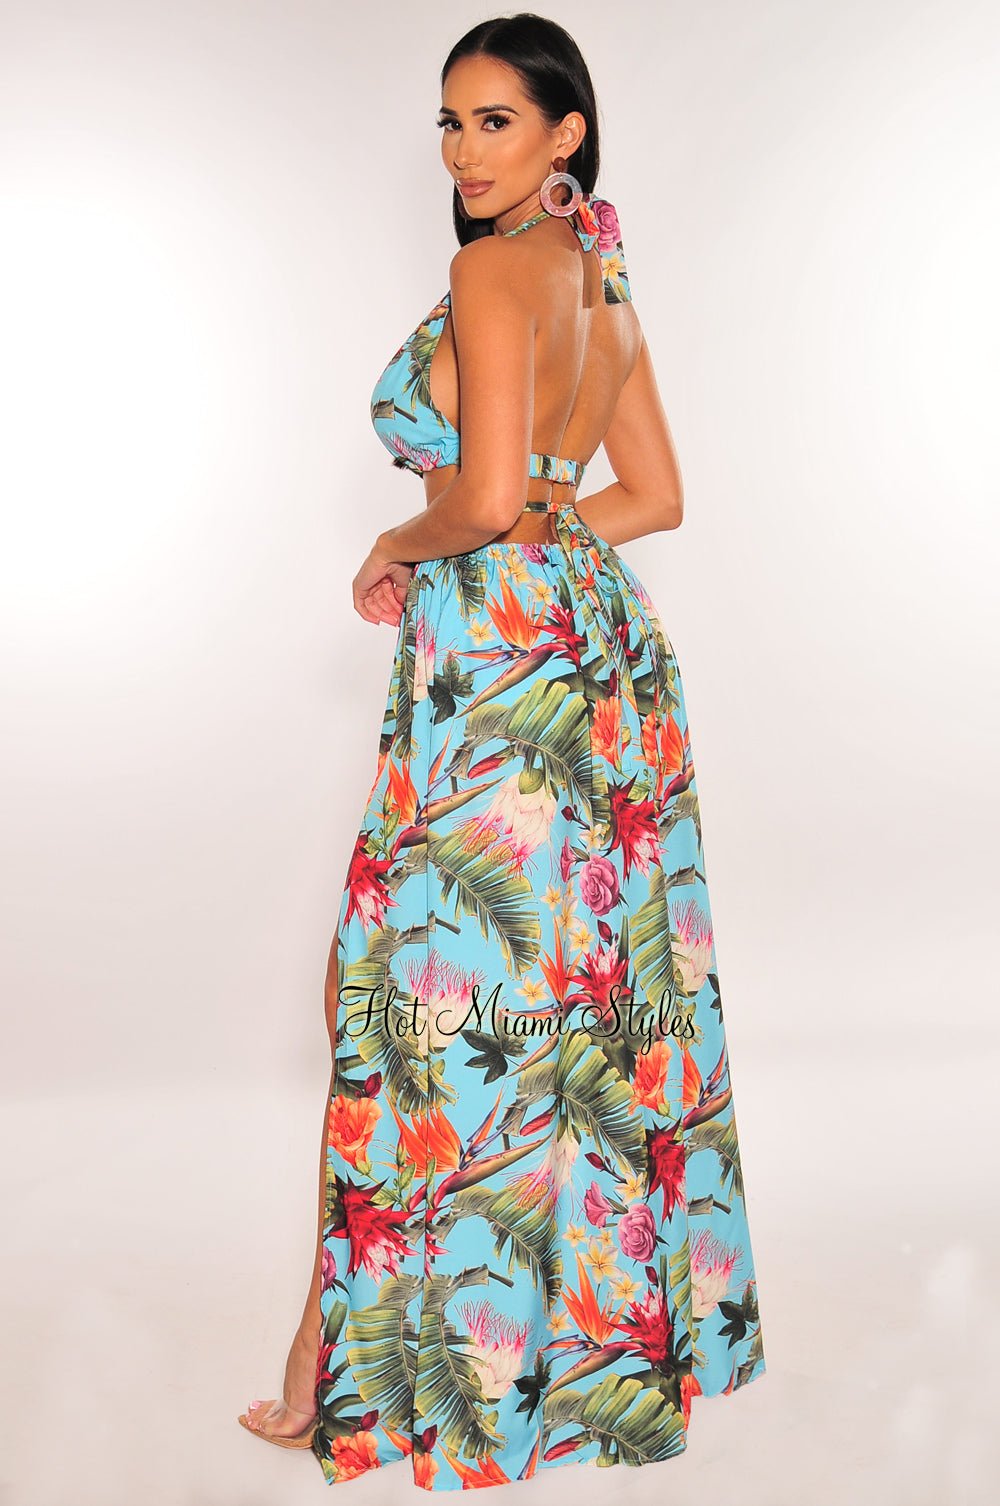 aqua tropical print padded halter o ring cut out slit belted maxi dress hot miami styles